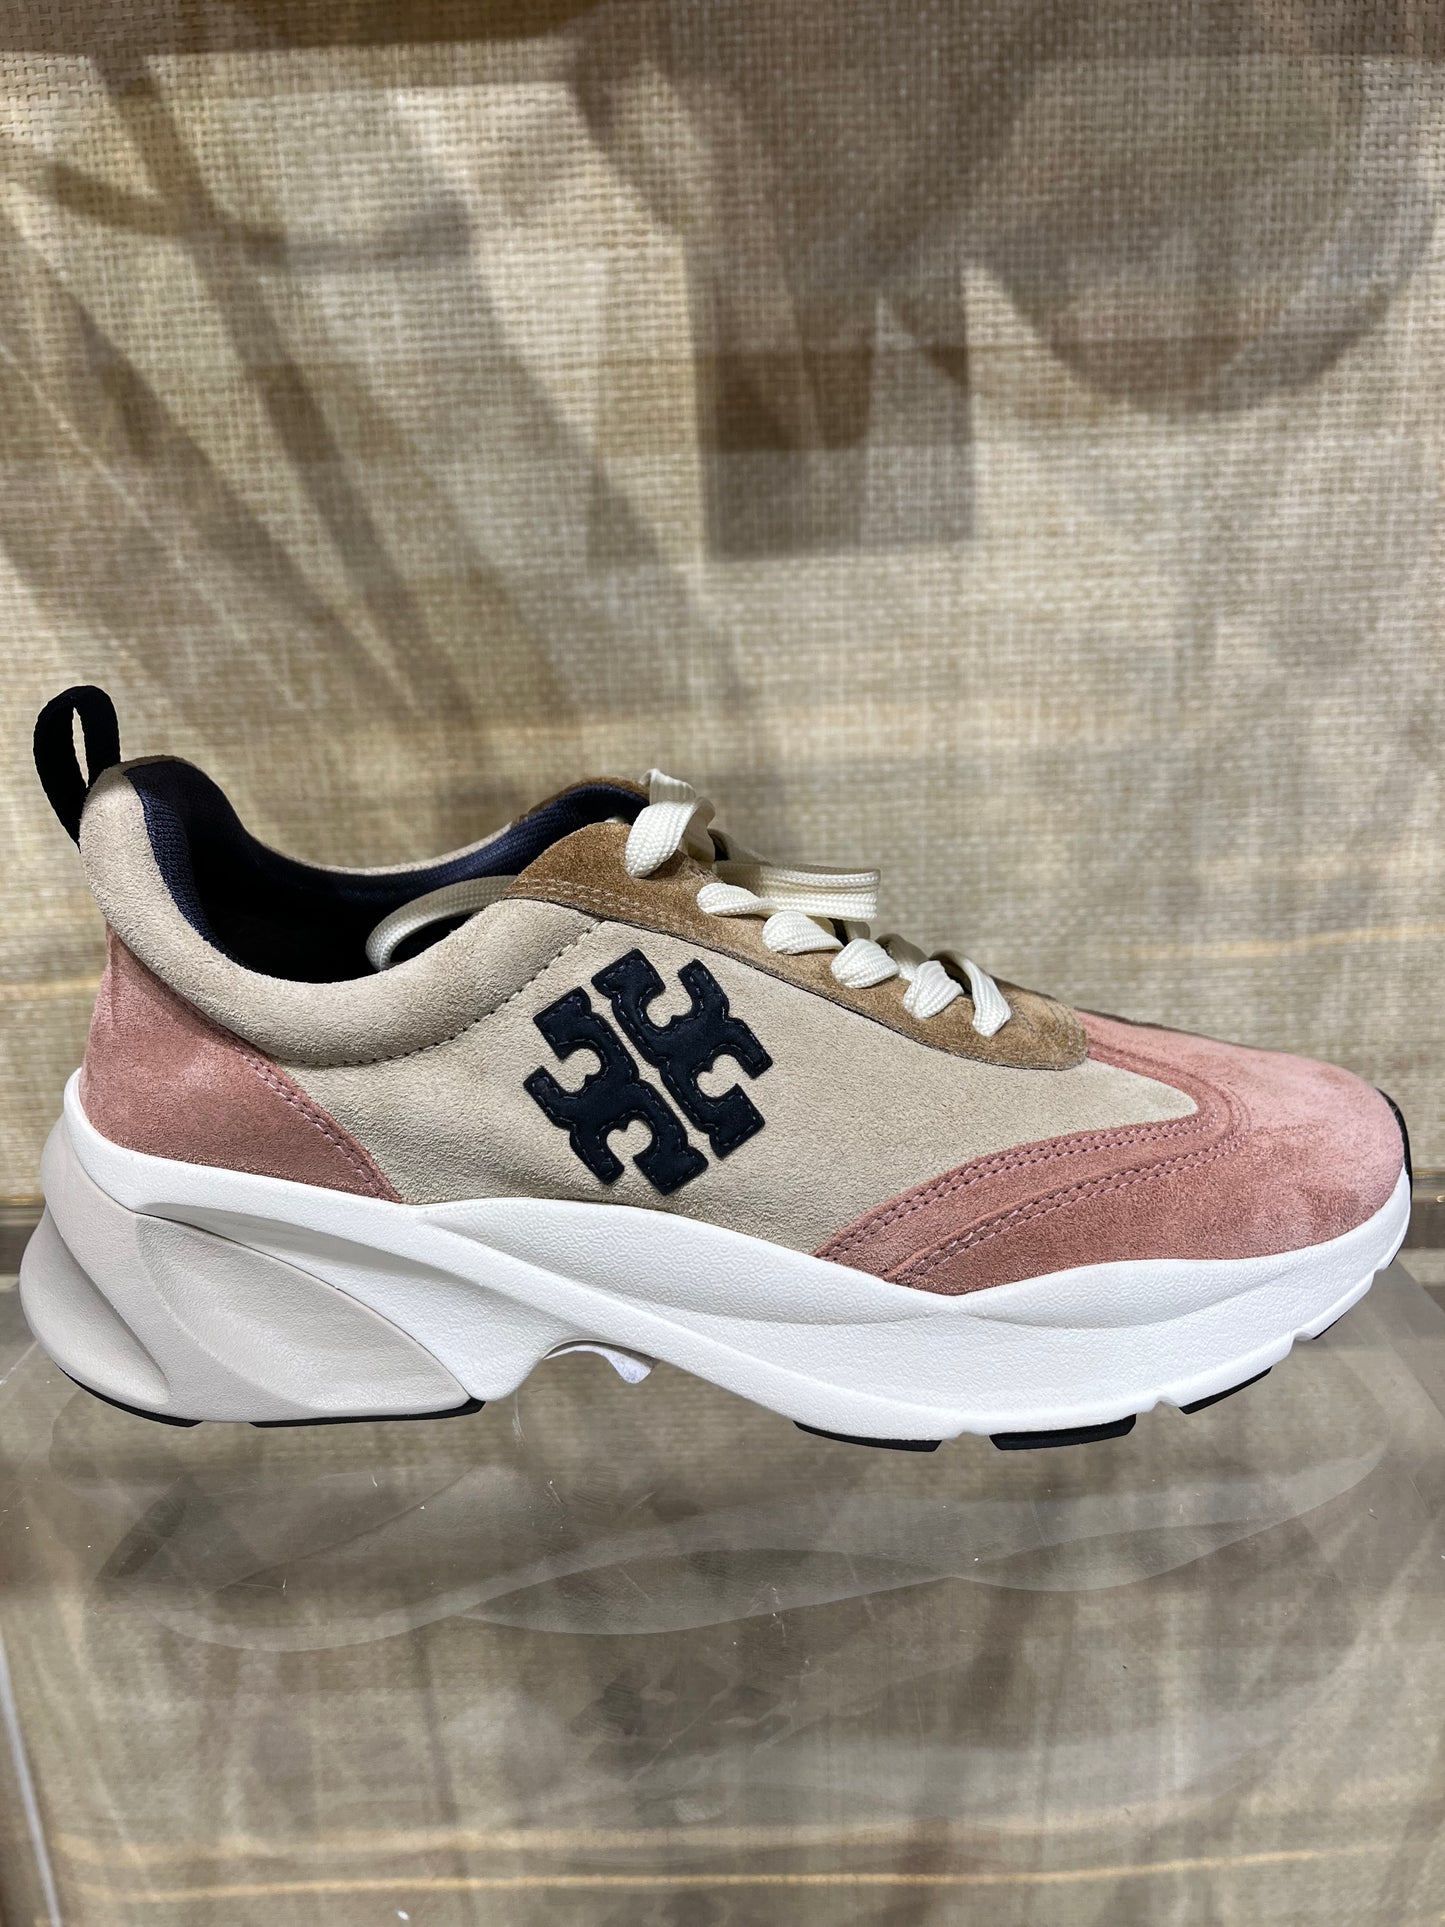 Tory Burch Good Luck Trainer, Tan / Blue / Pink, Style 85463, Retail $278